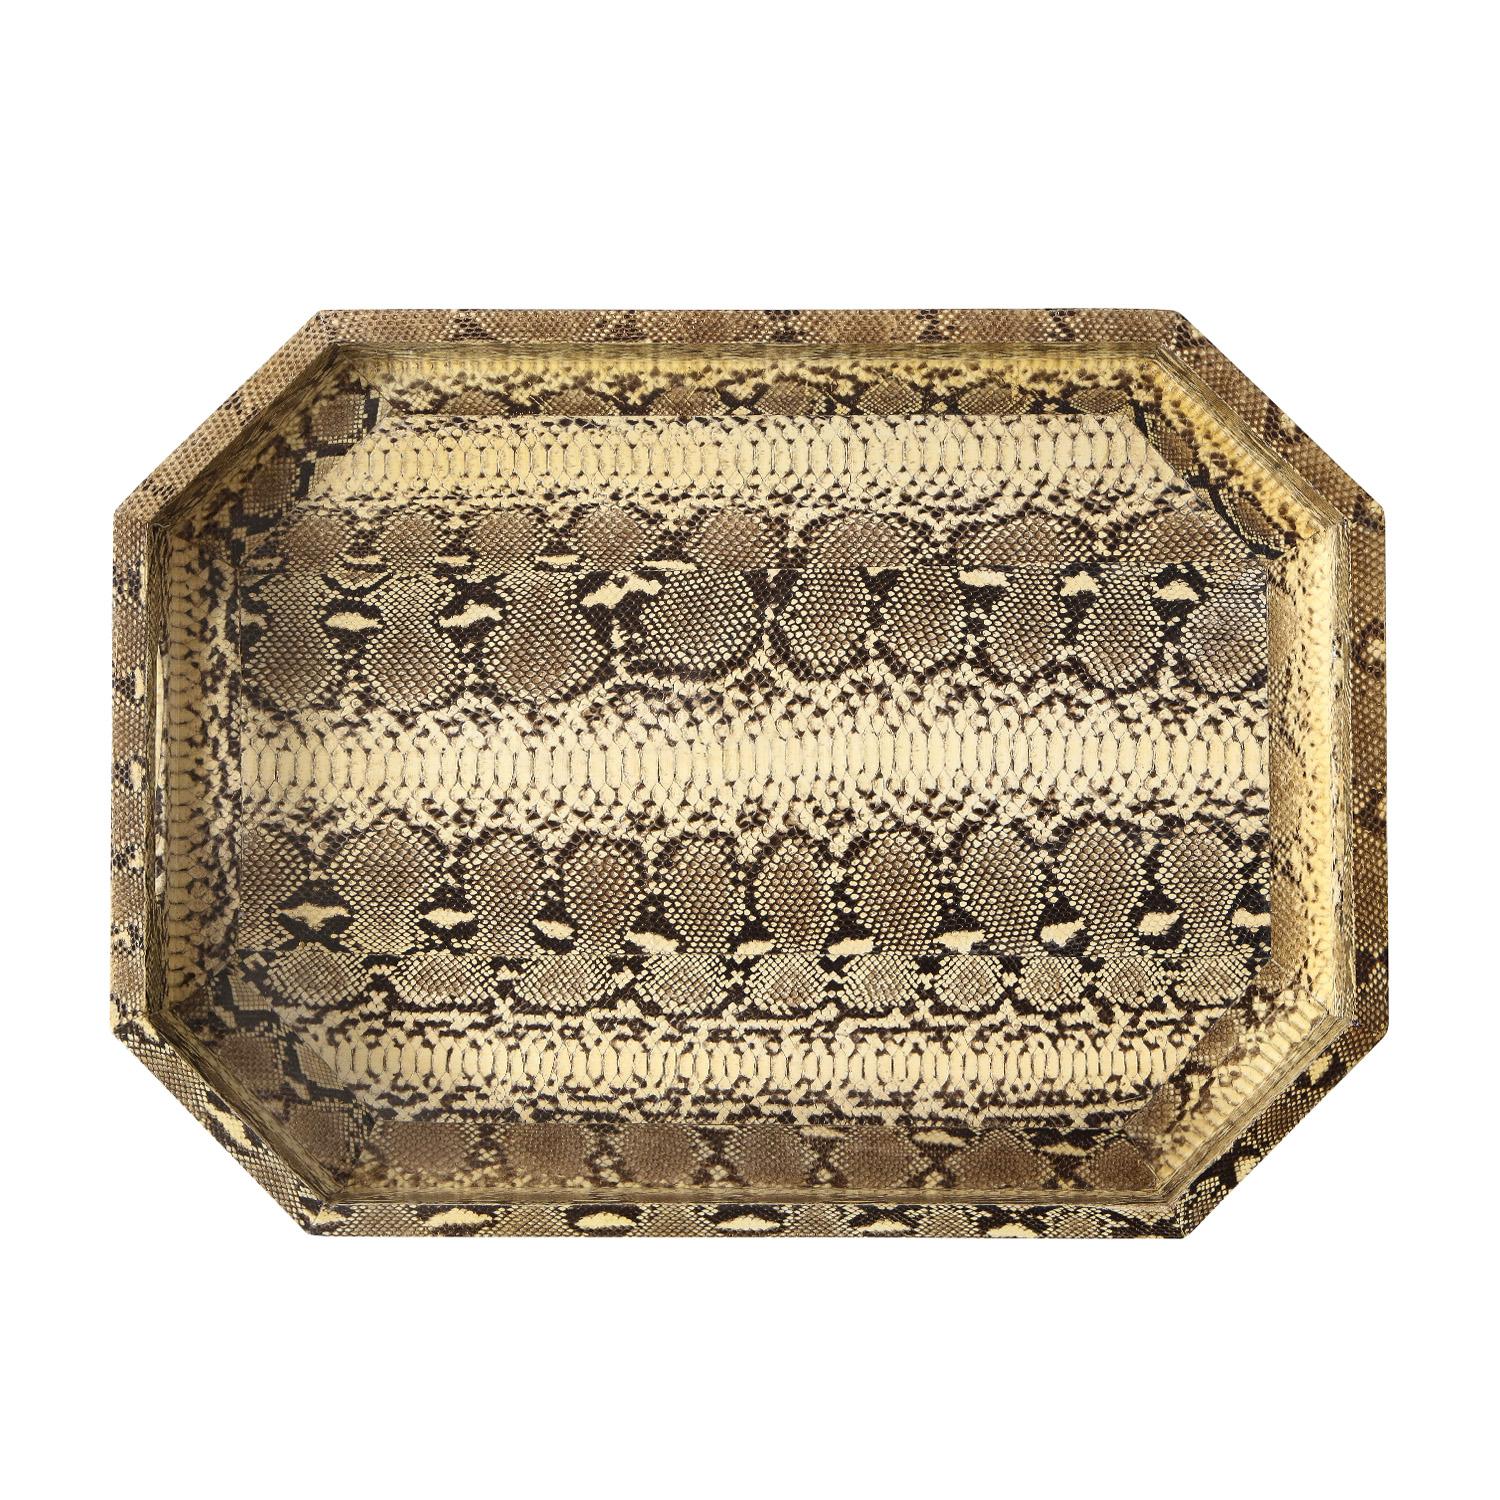 Hand-Crafted Lobel Originals Octagonal Tray in Natural Python, New For Sale